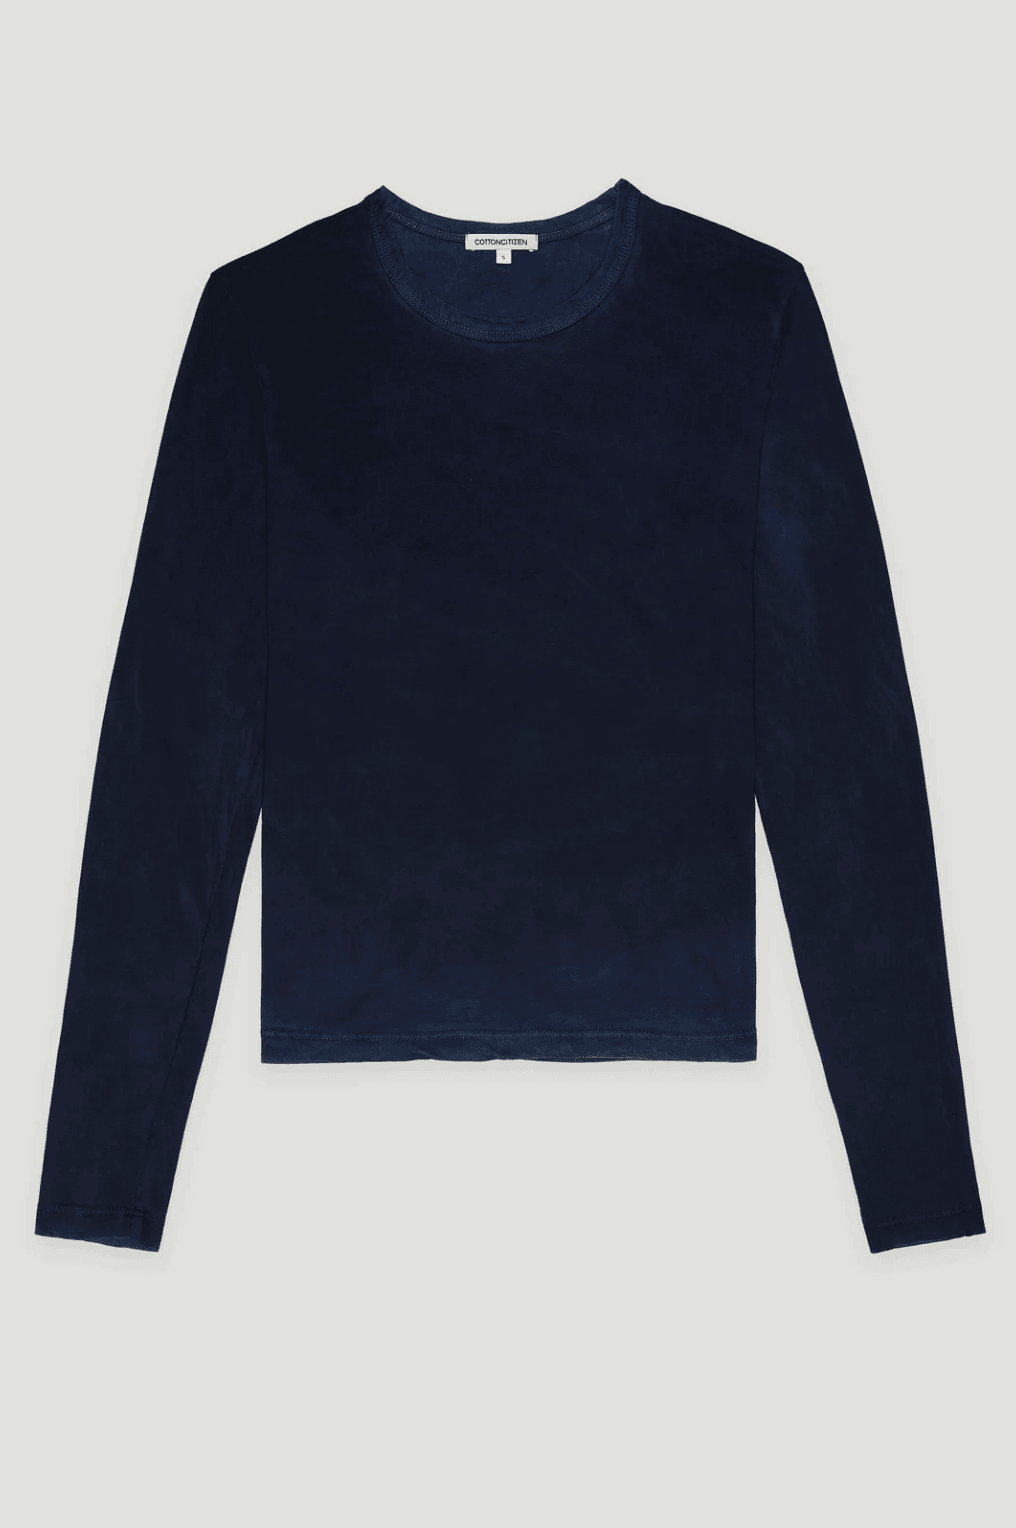 Standard Long Sleeve Tee by Cotton Citizen - Haven